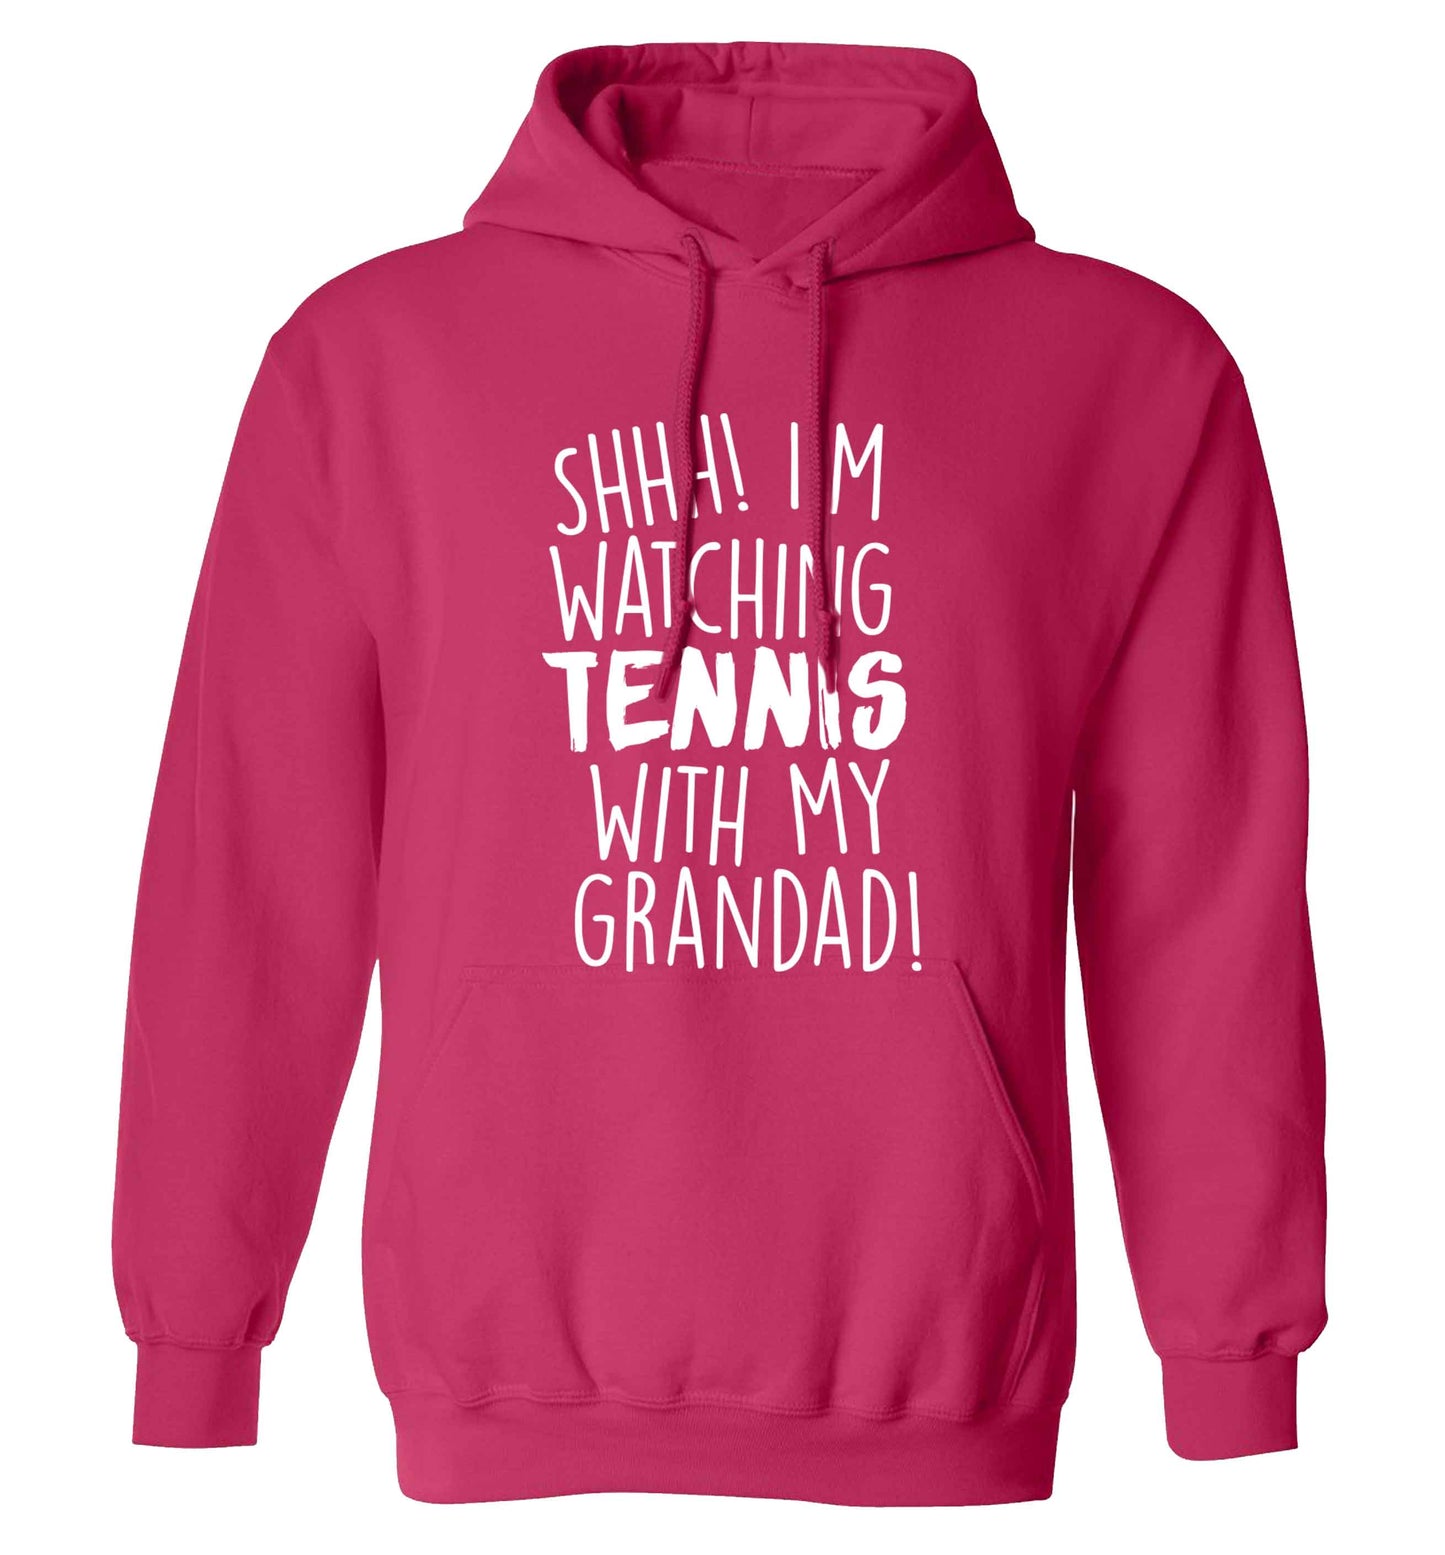 Shh! I'm watching tennis with my grandad! adults unisex pink hoodie 2XL